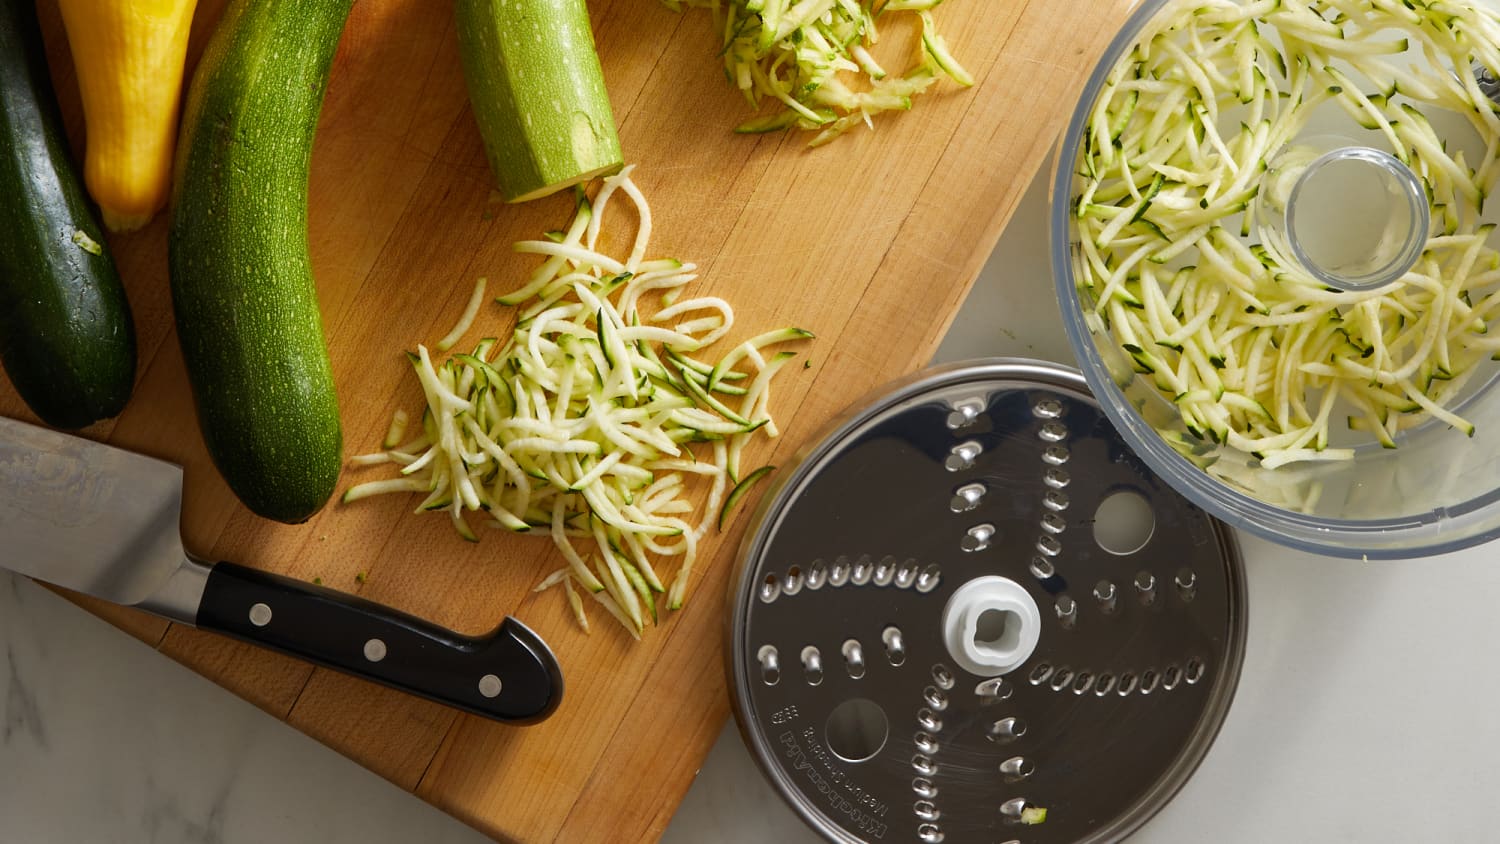 How To Shred Zucchini – My Kitchen Gadgets